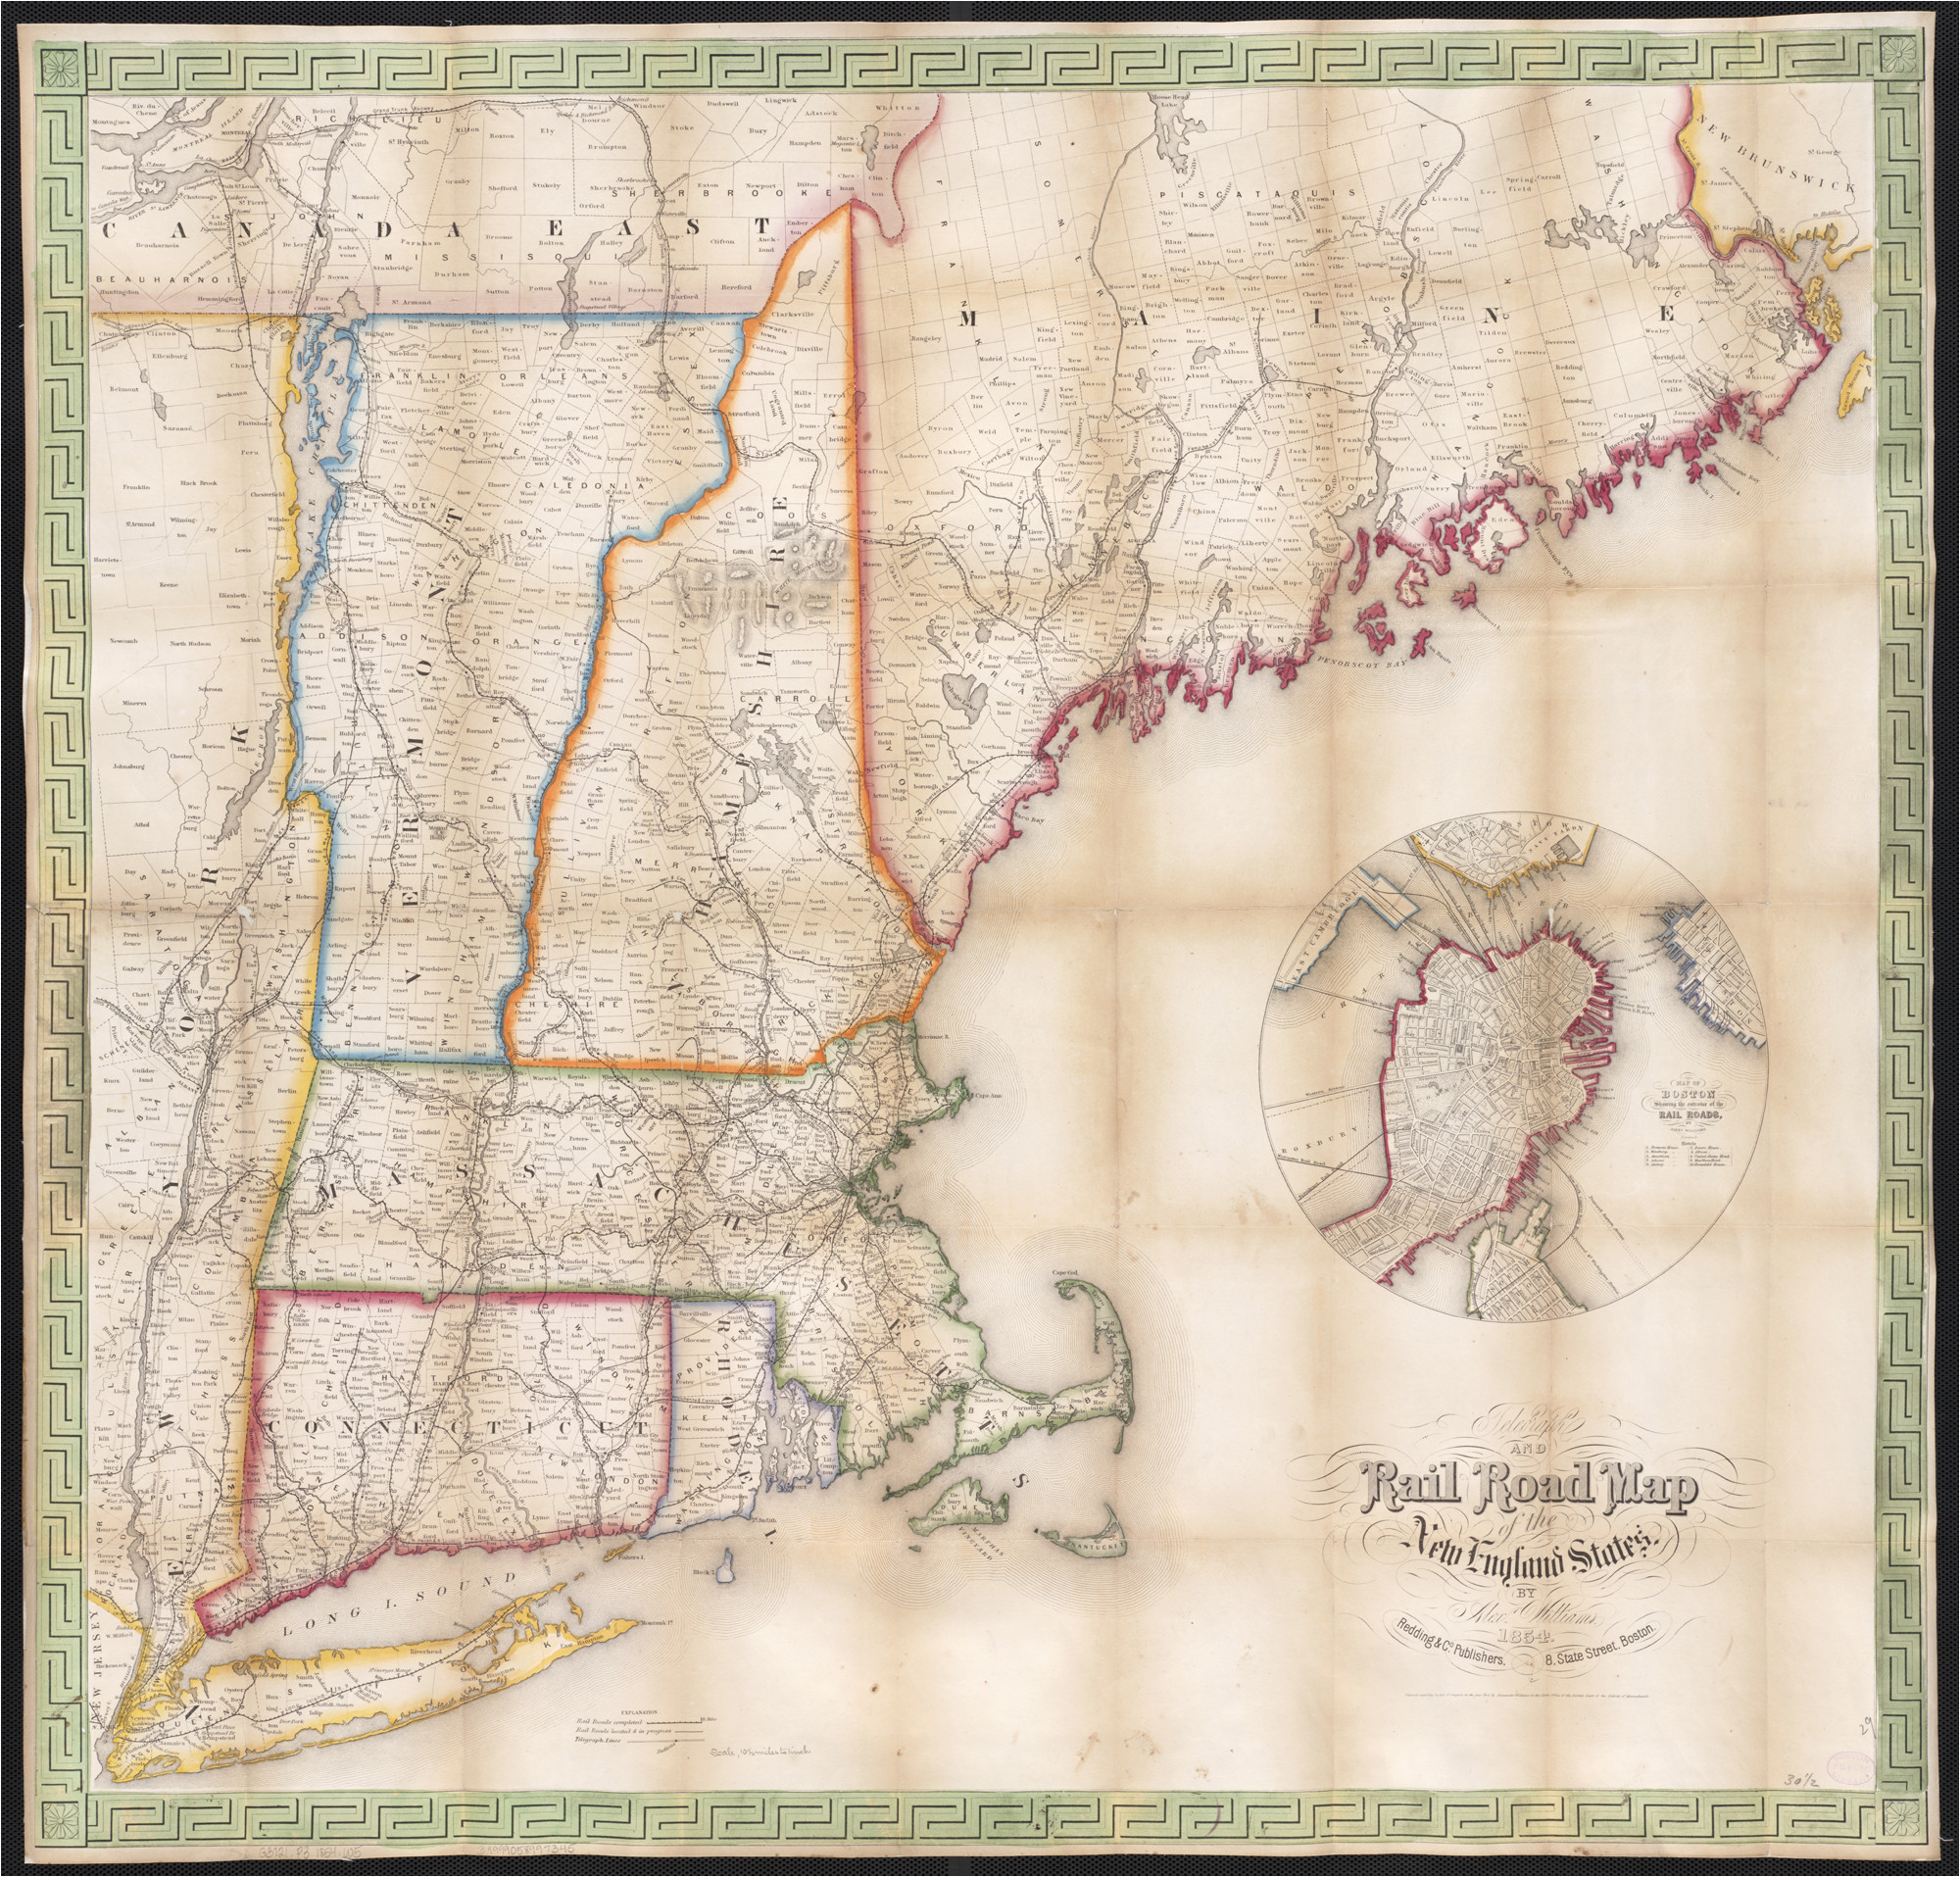 New England Driving Map File Telegraph and Rail Road Map Of the New England States